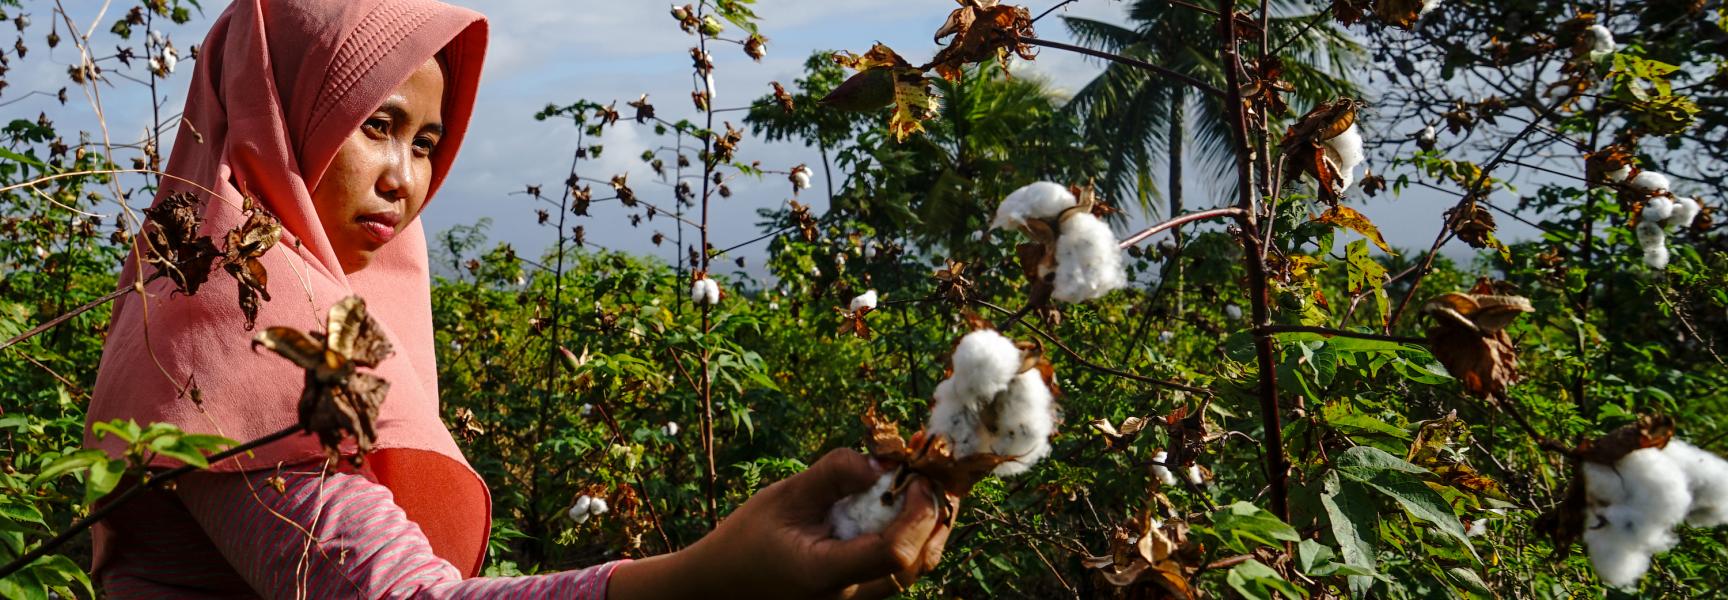 Woman picking cotton in Indonesia